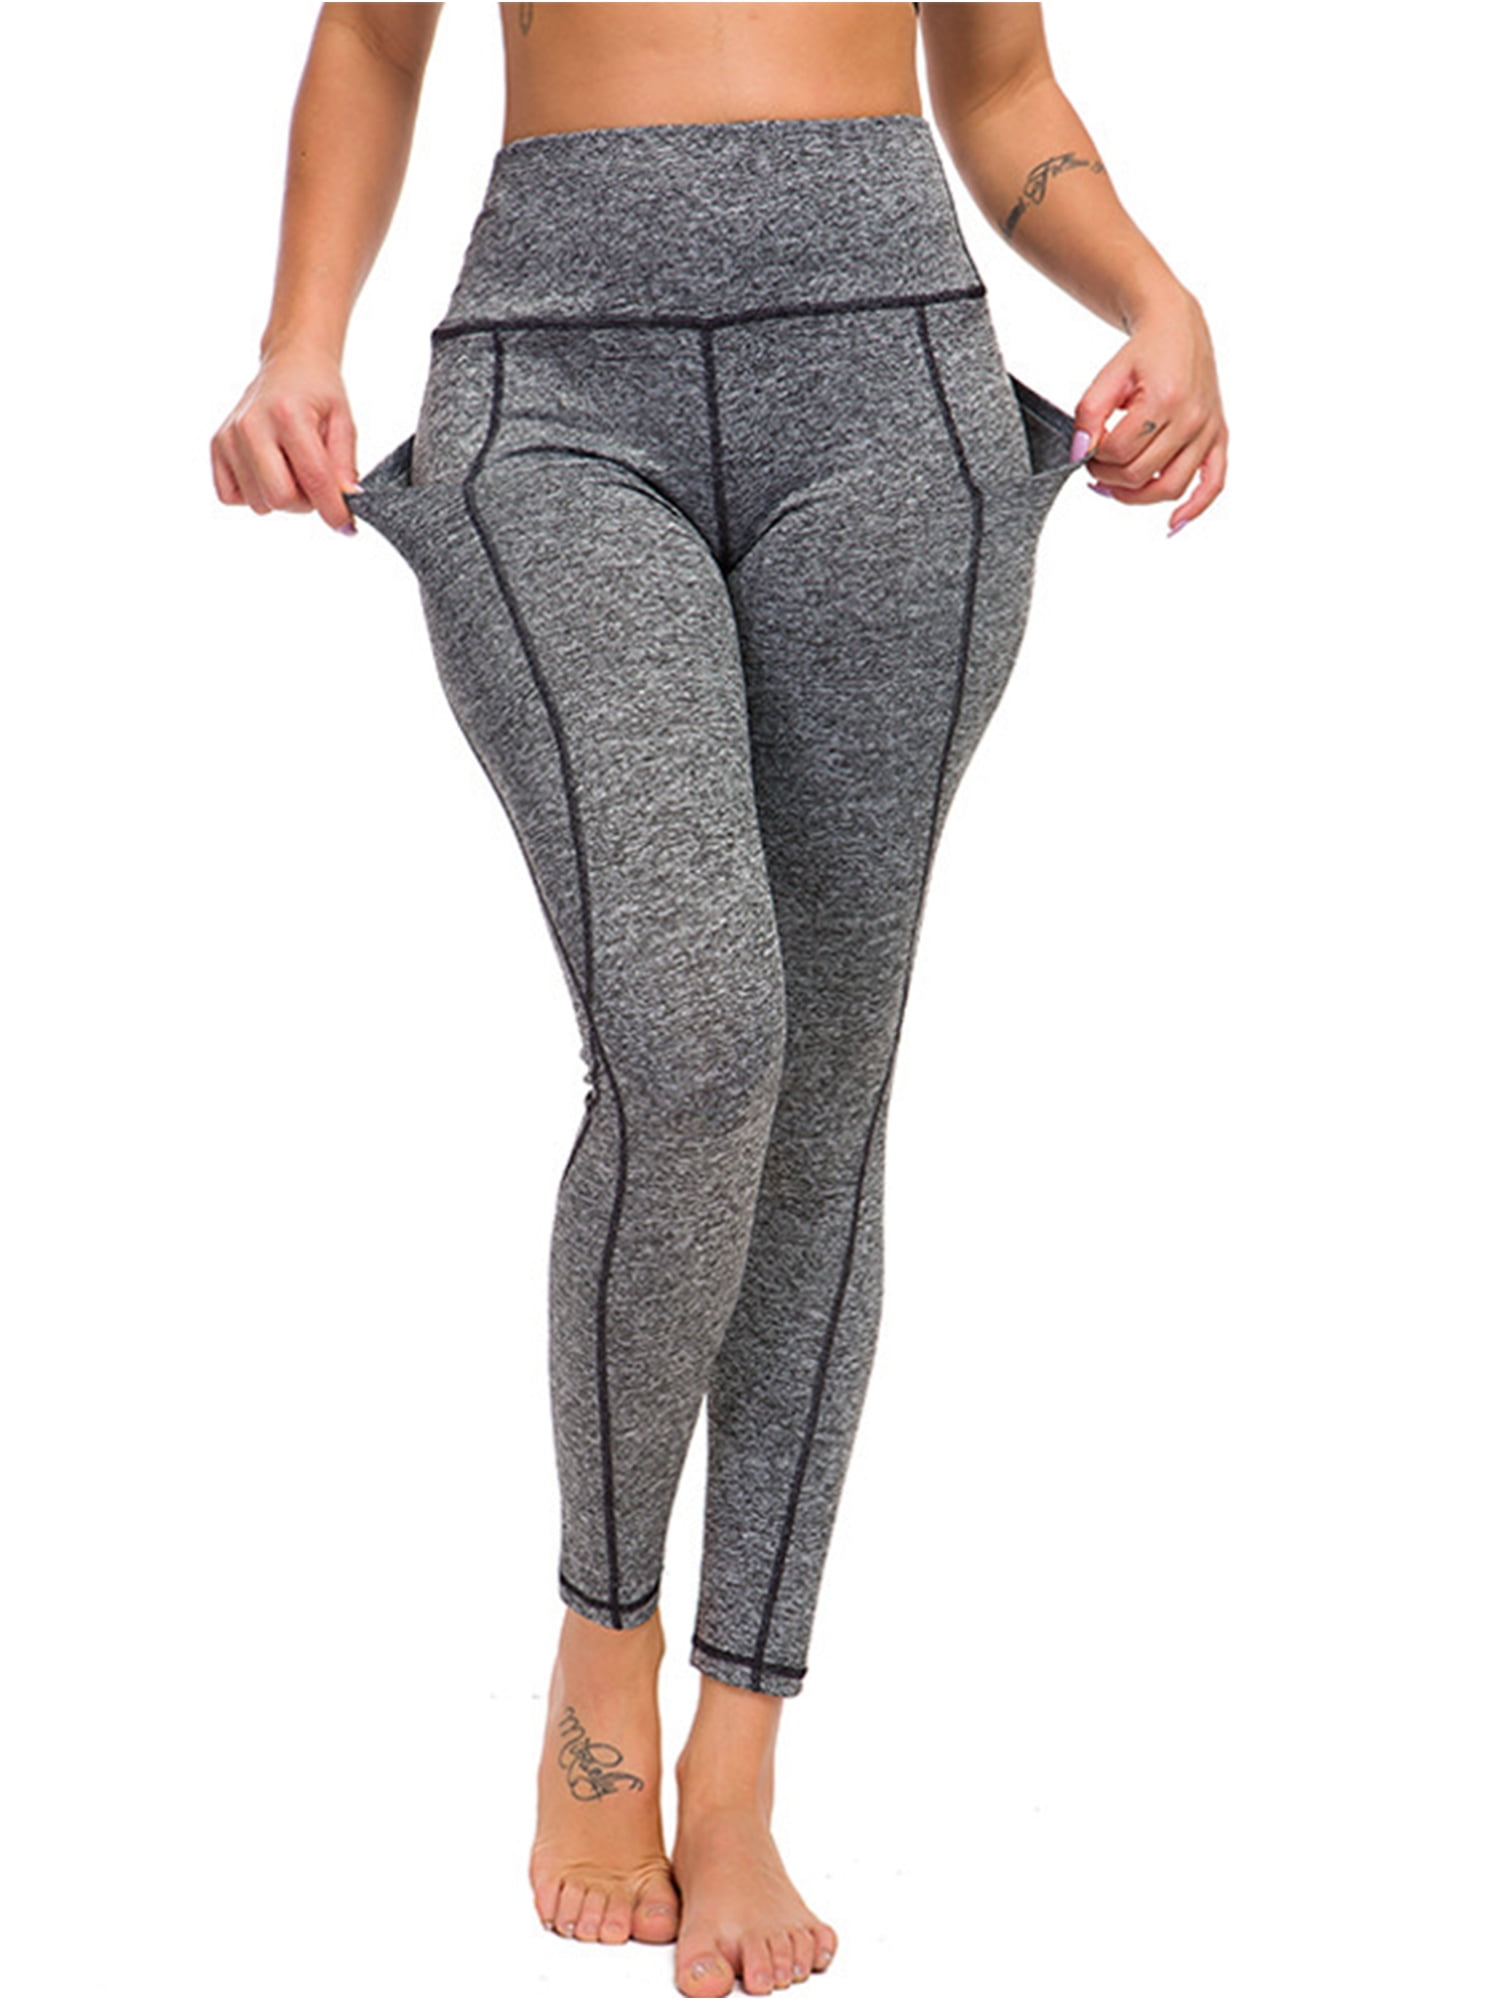 Women Stretch Pants Plus Size Workout Clothes Yoga Pants with Pockets High  Waist Jogging Running Sports Gym Fitness Pants Sweatpants